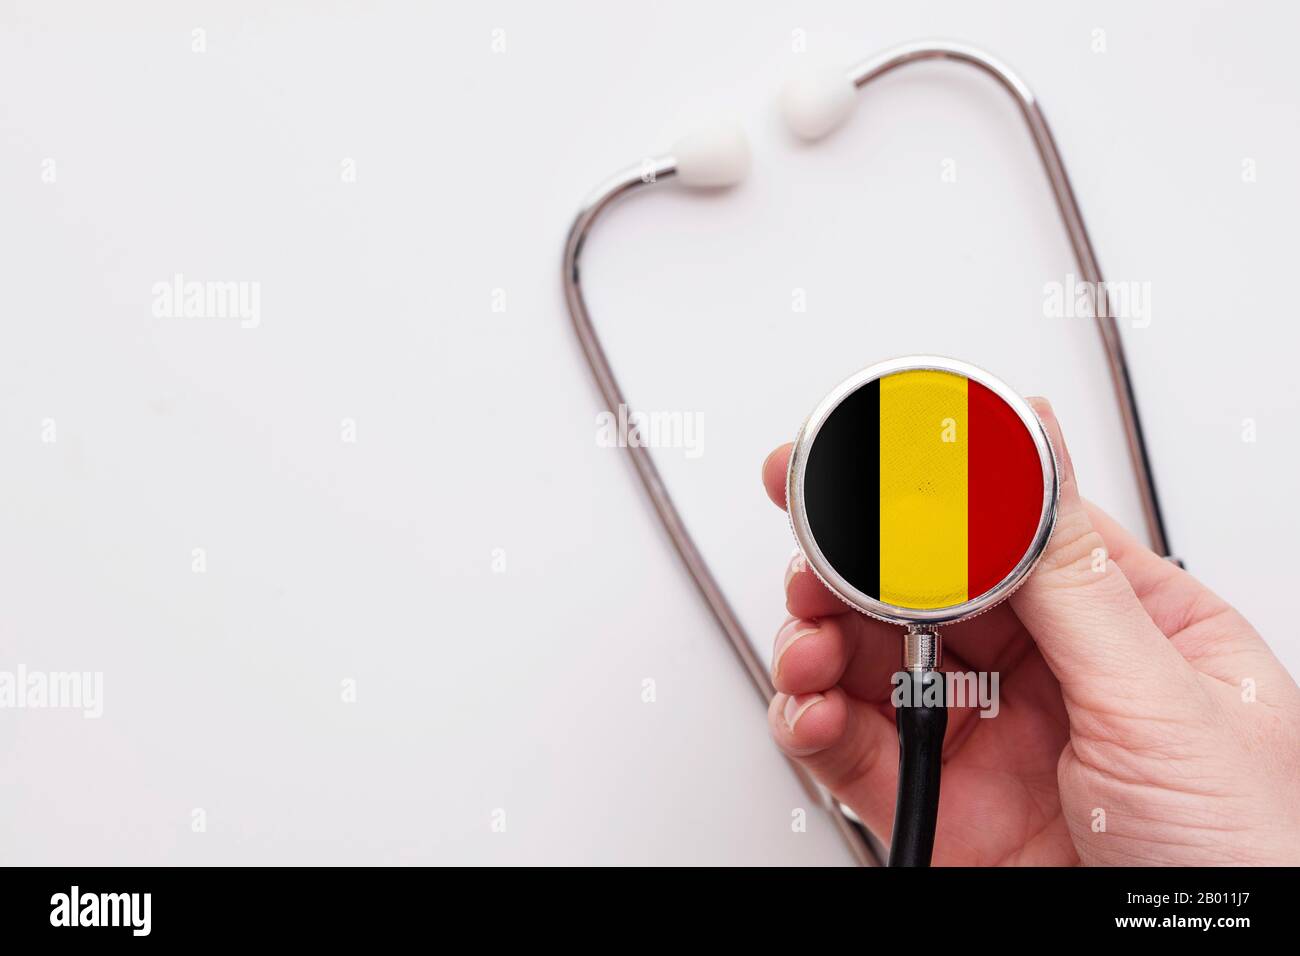 Belgium healthcare concept. Doctor holding a medical stethoscope. Stock Photo